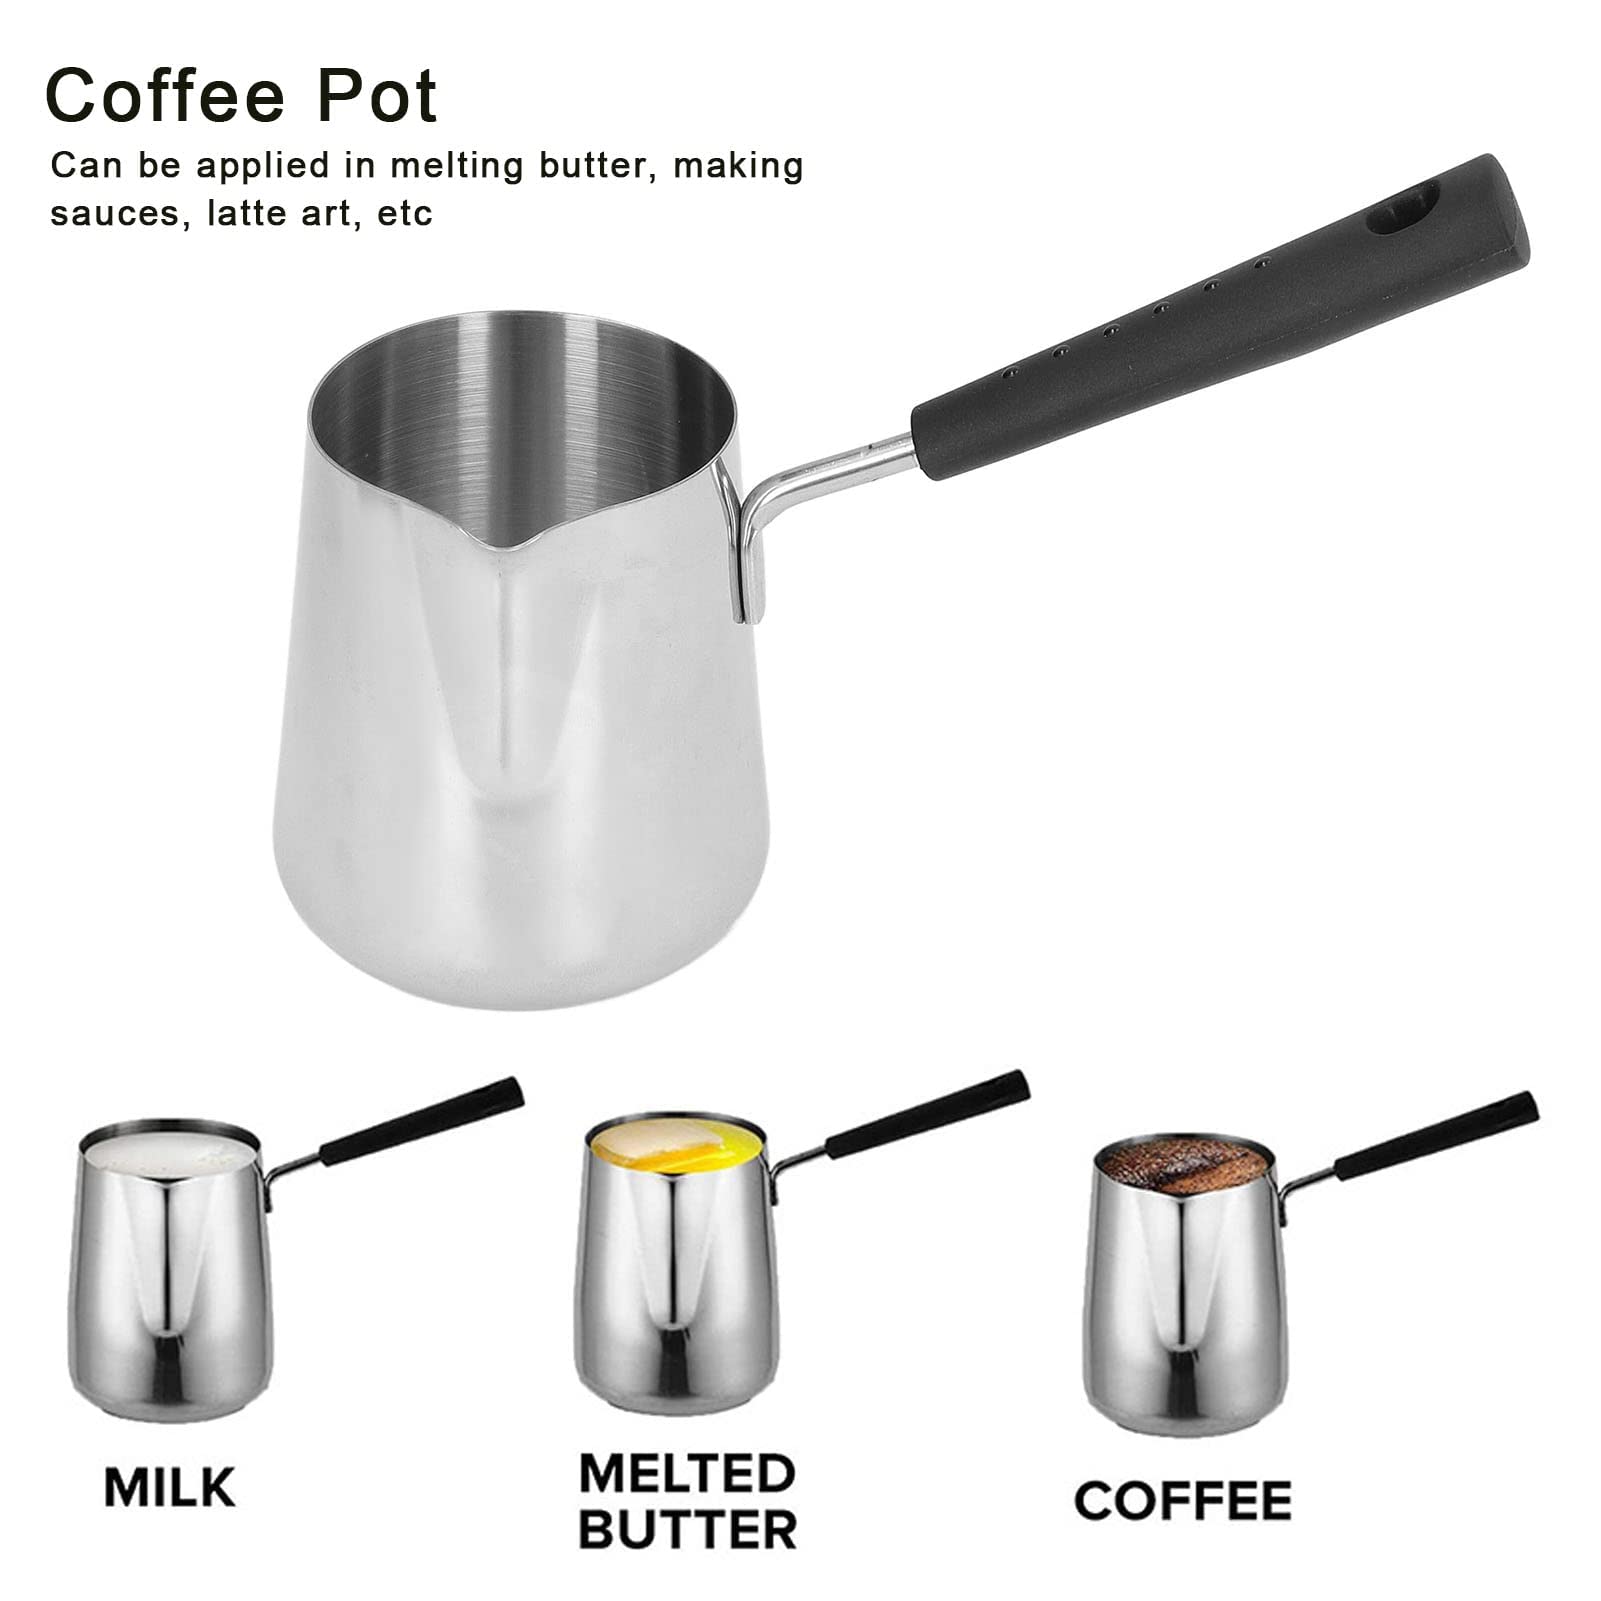 2pcs Milk Butter Warmer Pot, Turkish Coffee Pot Milk Warmer Pot Milk Boiling Pot Mini Saucepan with Spout for Maple Syrup, Sauce Heating, 350ml/12oz